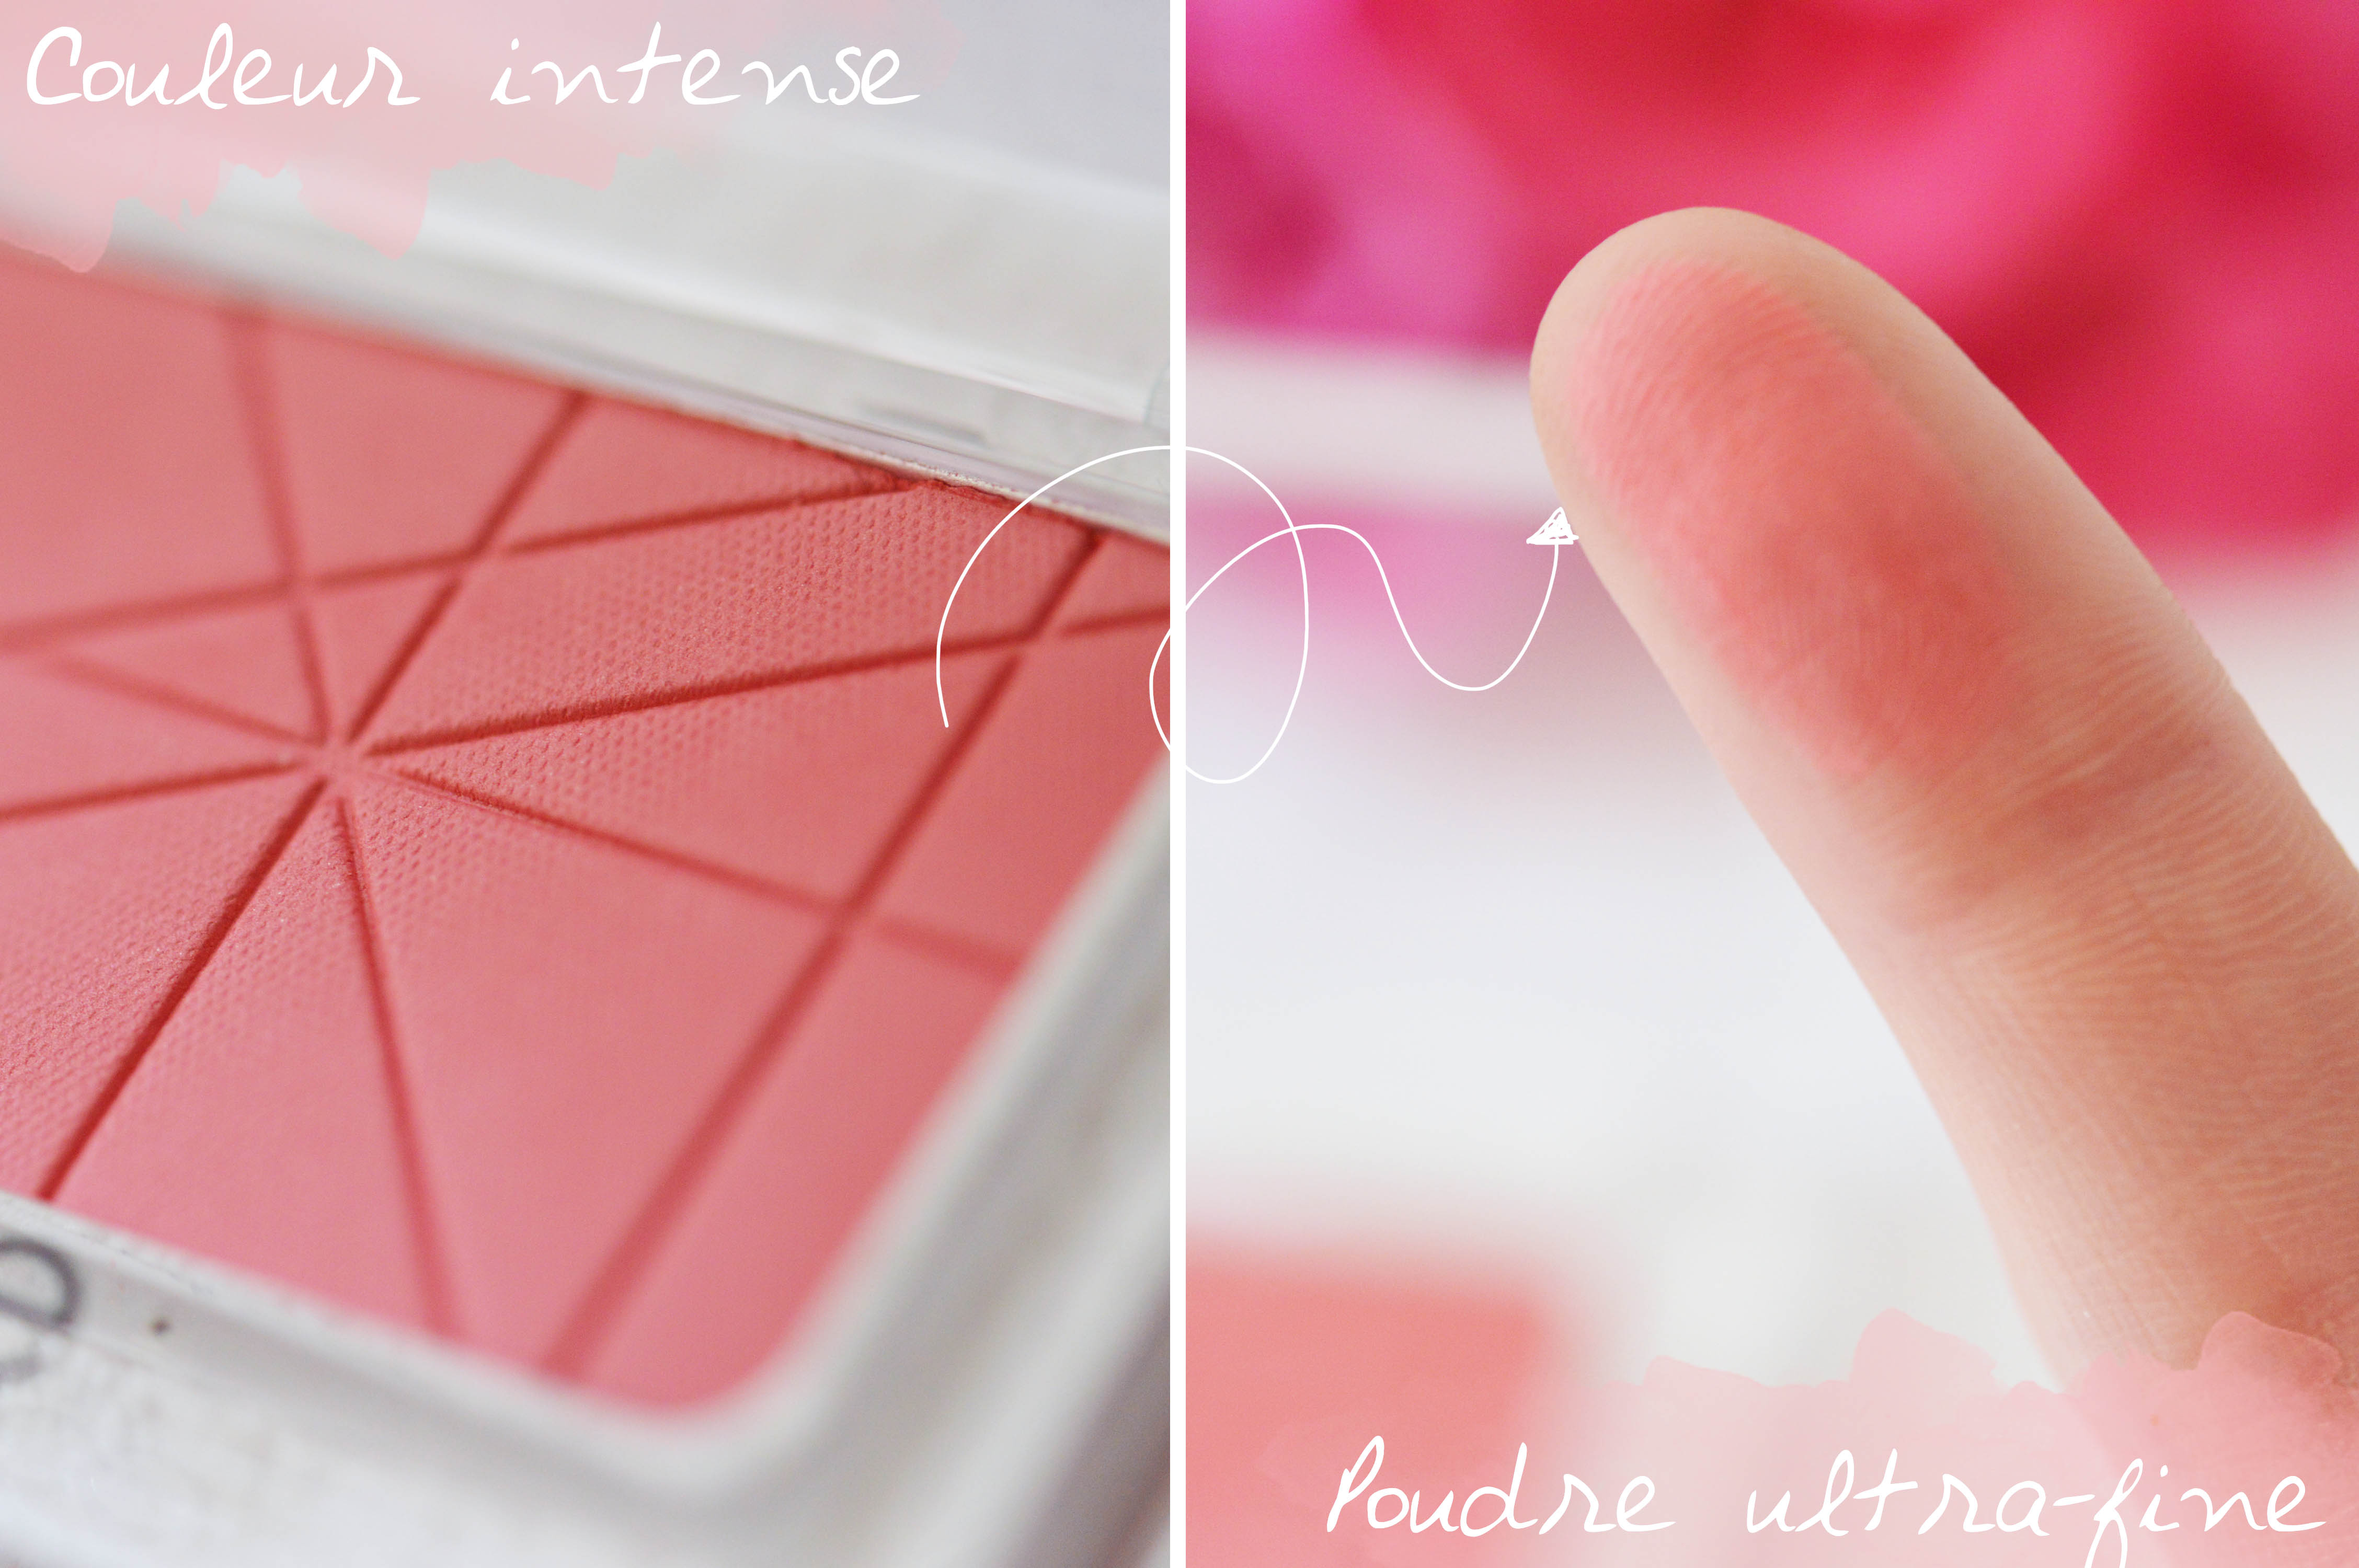 ALITTLEB_BLOG_BEAUTE_CATRICE_LA_MARQUE_QUIL_FAUT_ENVIER_A_NOS_COPINES_FRONTALIERES_EPISODE_2_DEFINING_BLUSH_THINK_PINK_PACKAGING_SWATCH